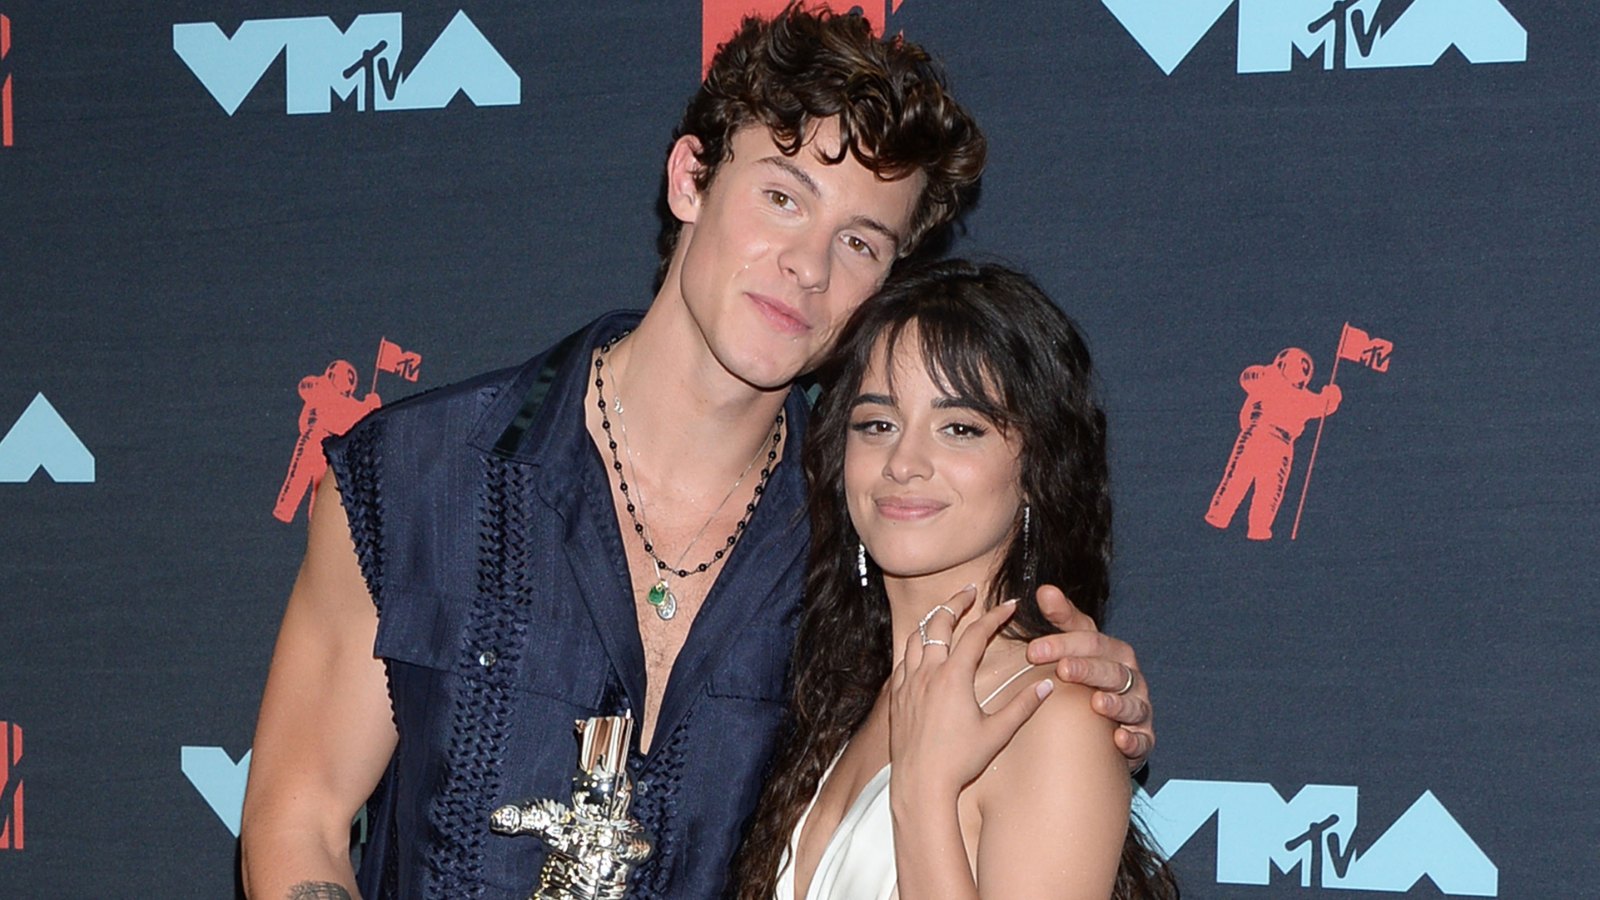 Camila Cabello and Shawn Mendes Are Social Distancing Together